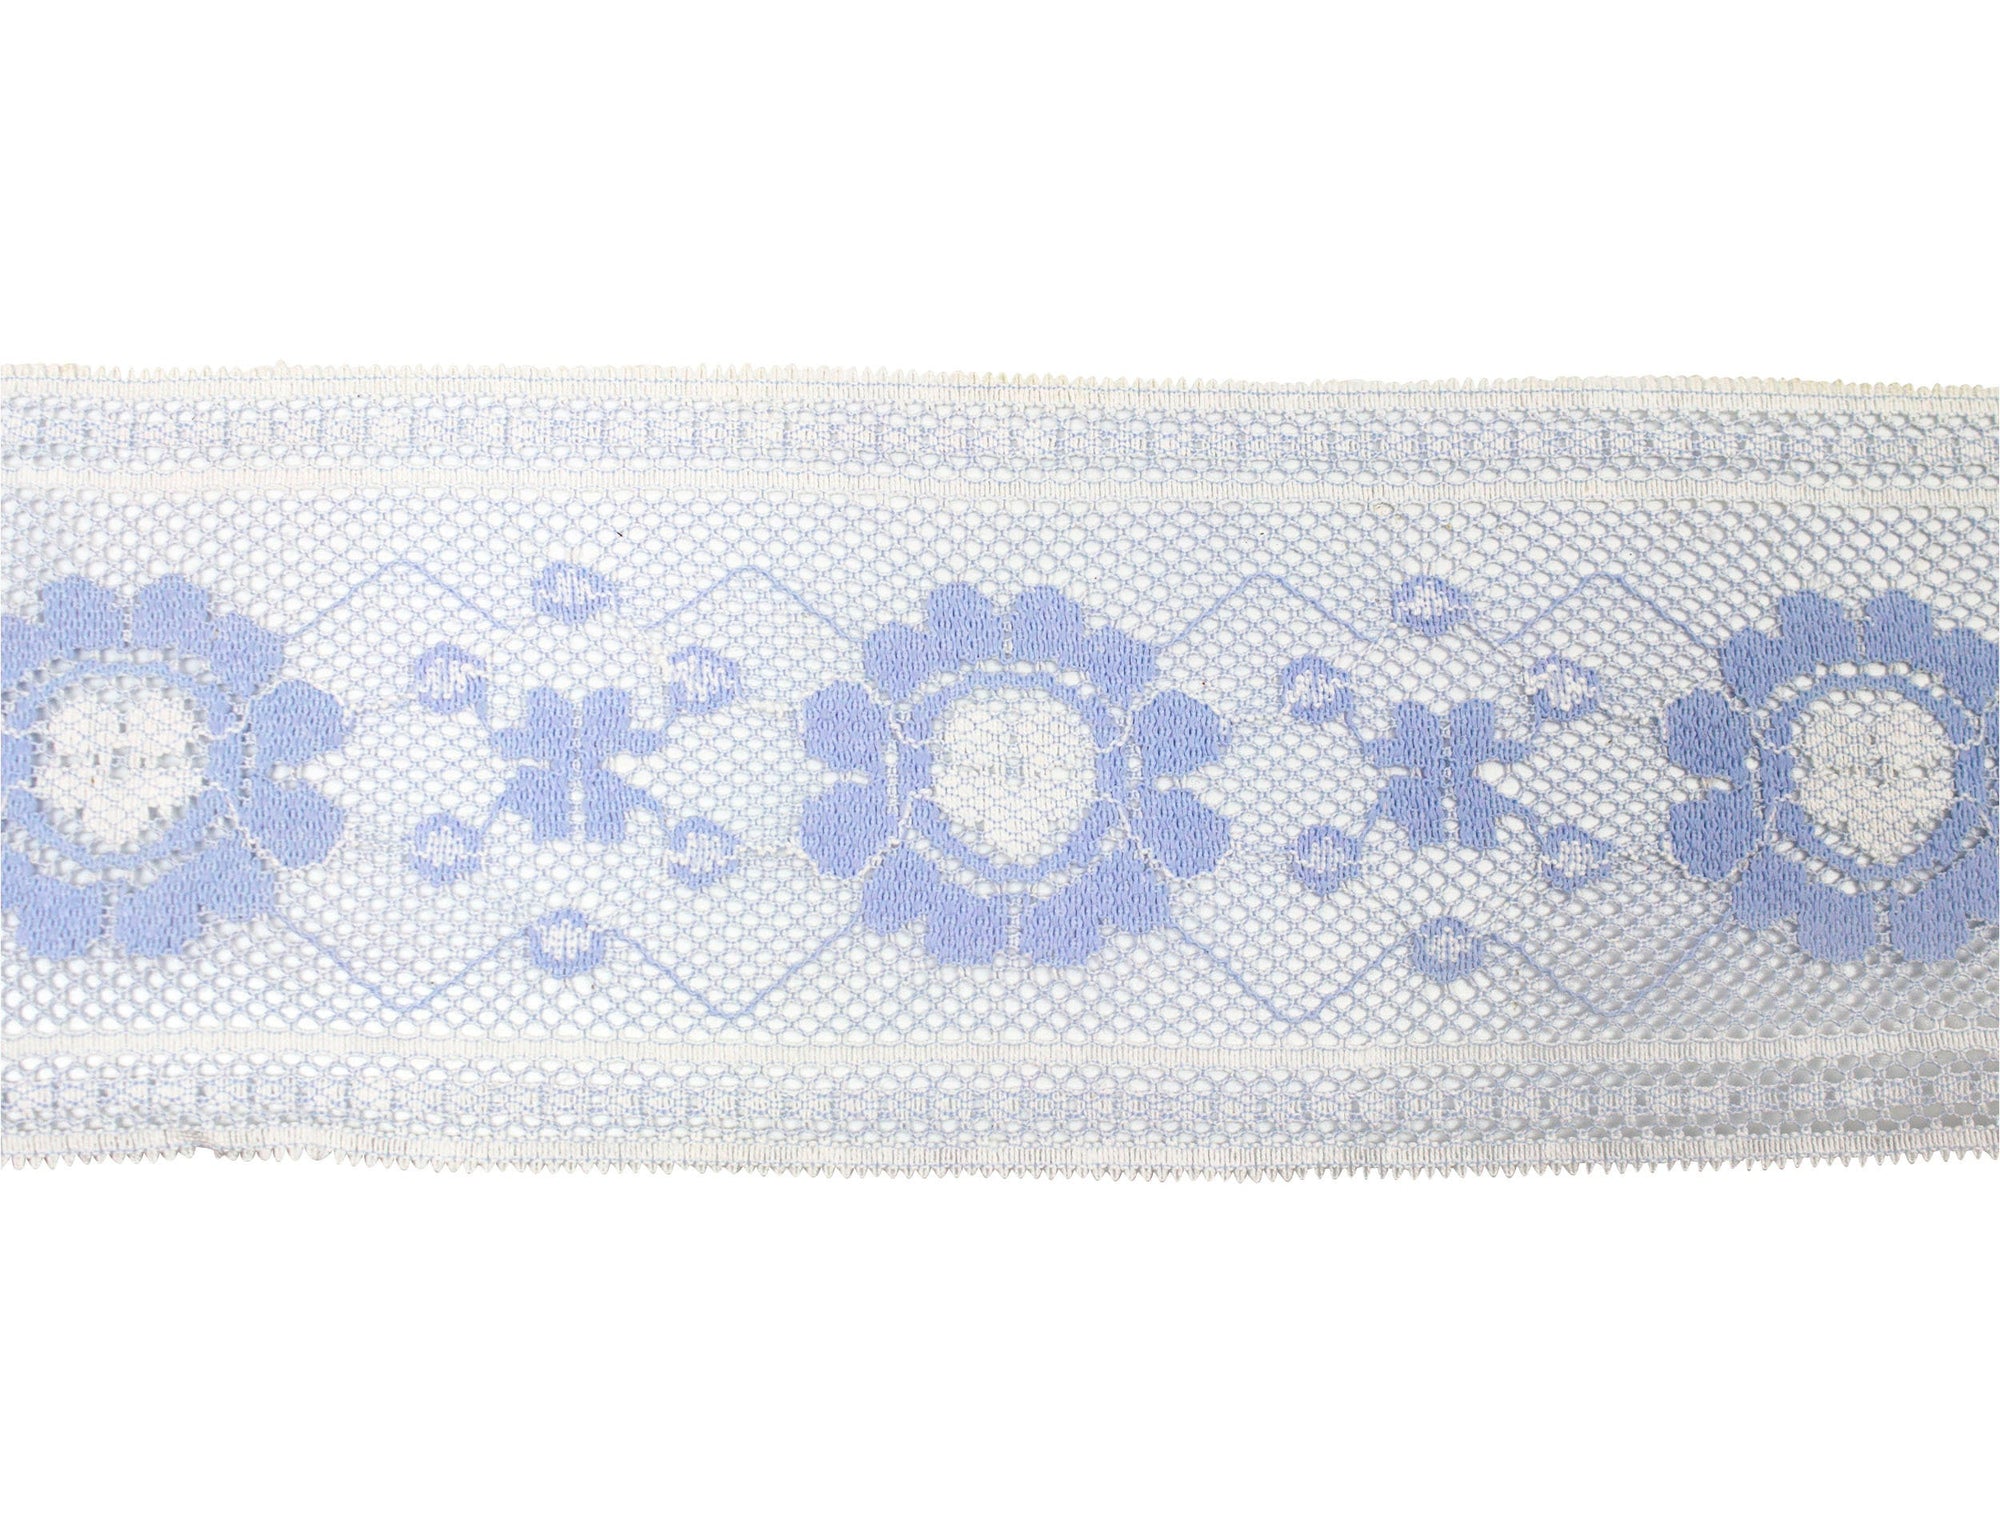 Vintage Lace Trim Light Blue Floral with White Trim 3 3/4" - Sold by the Yard - Humboldt Haberdashery